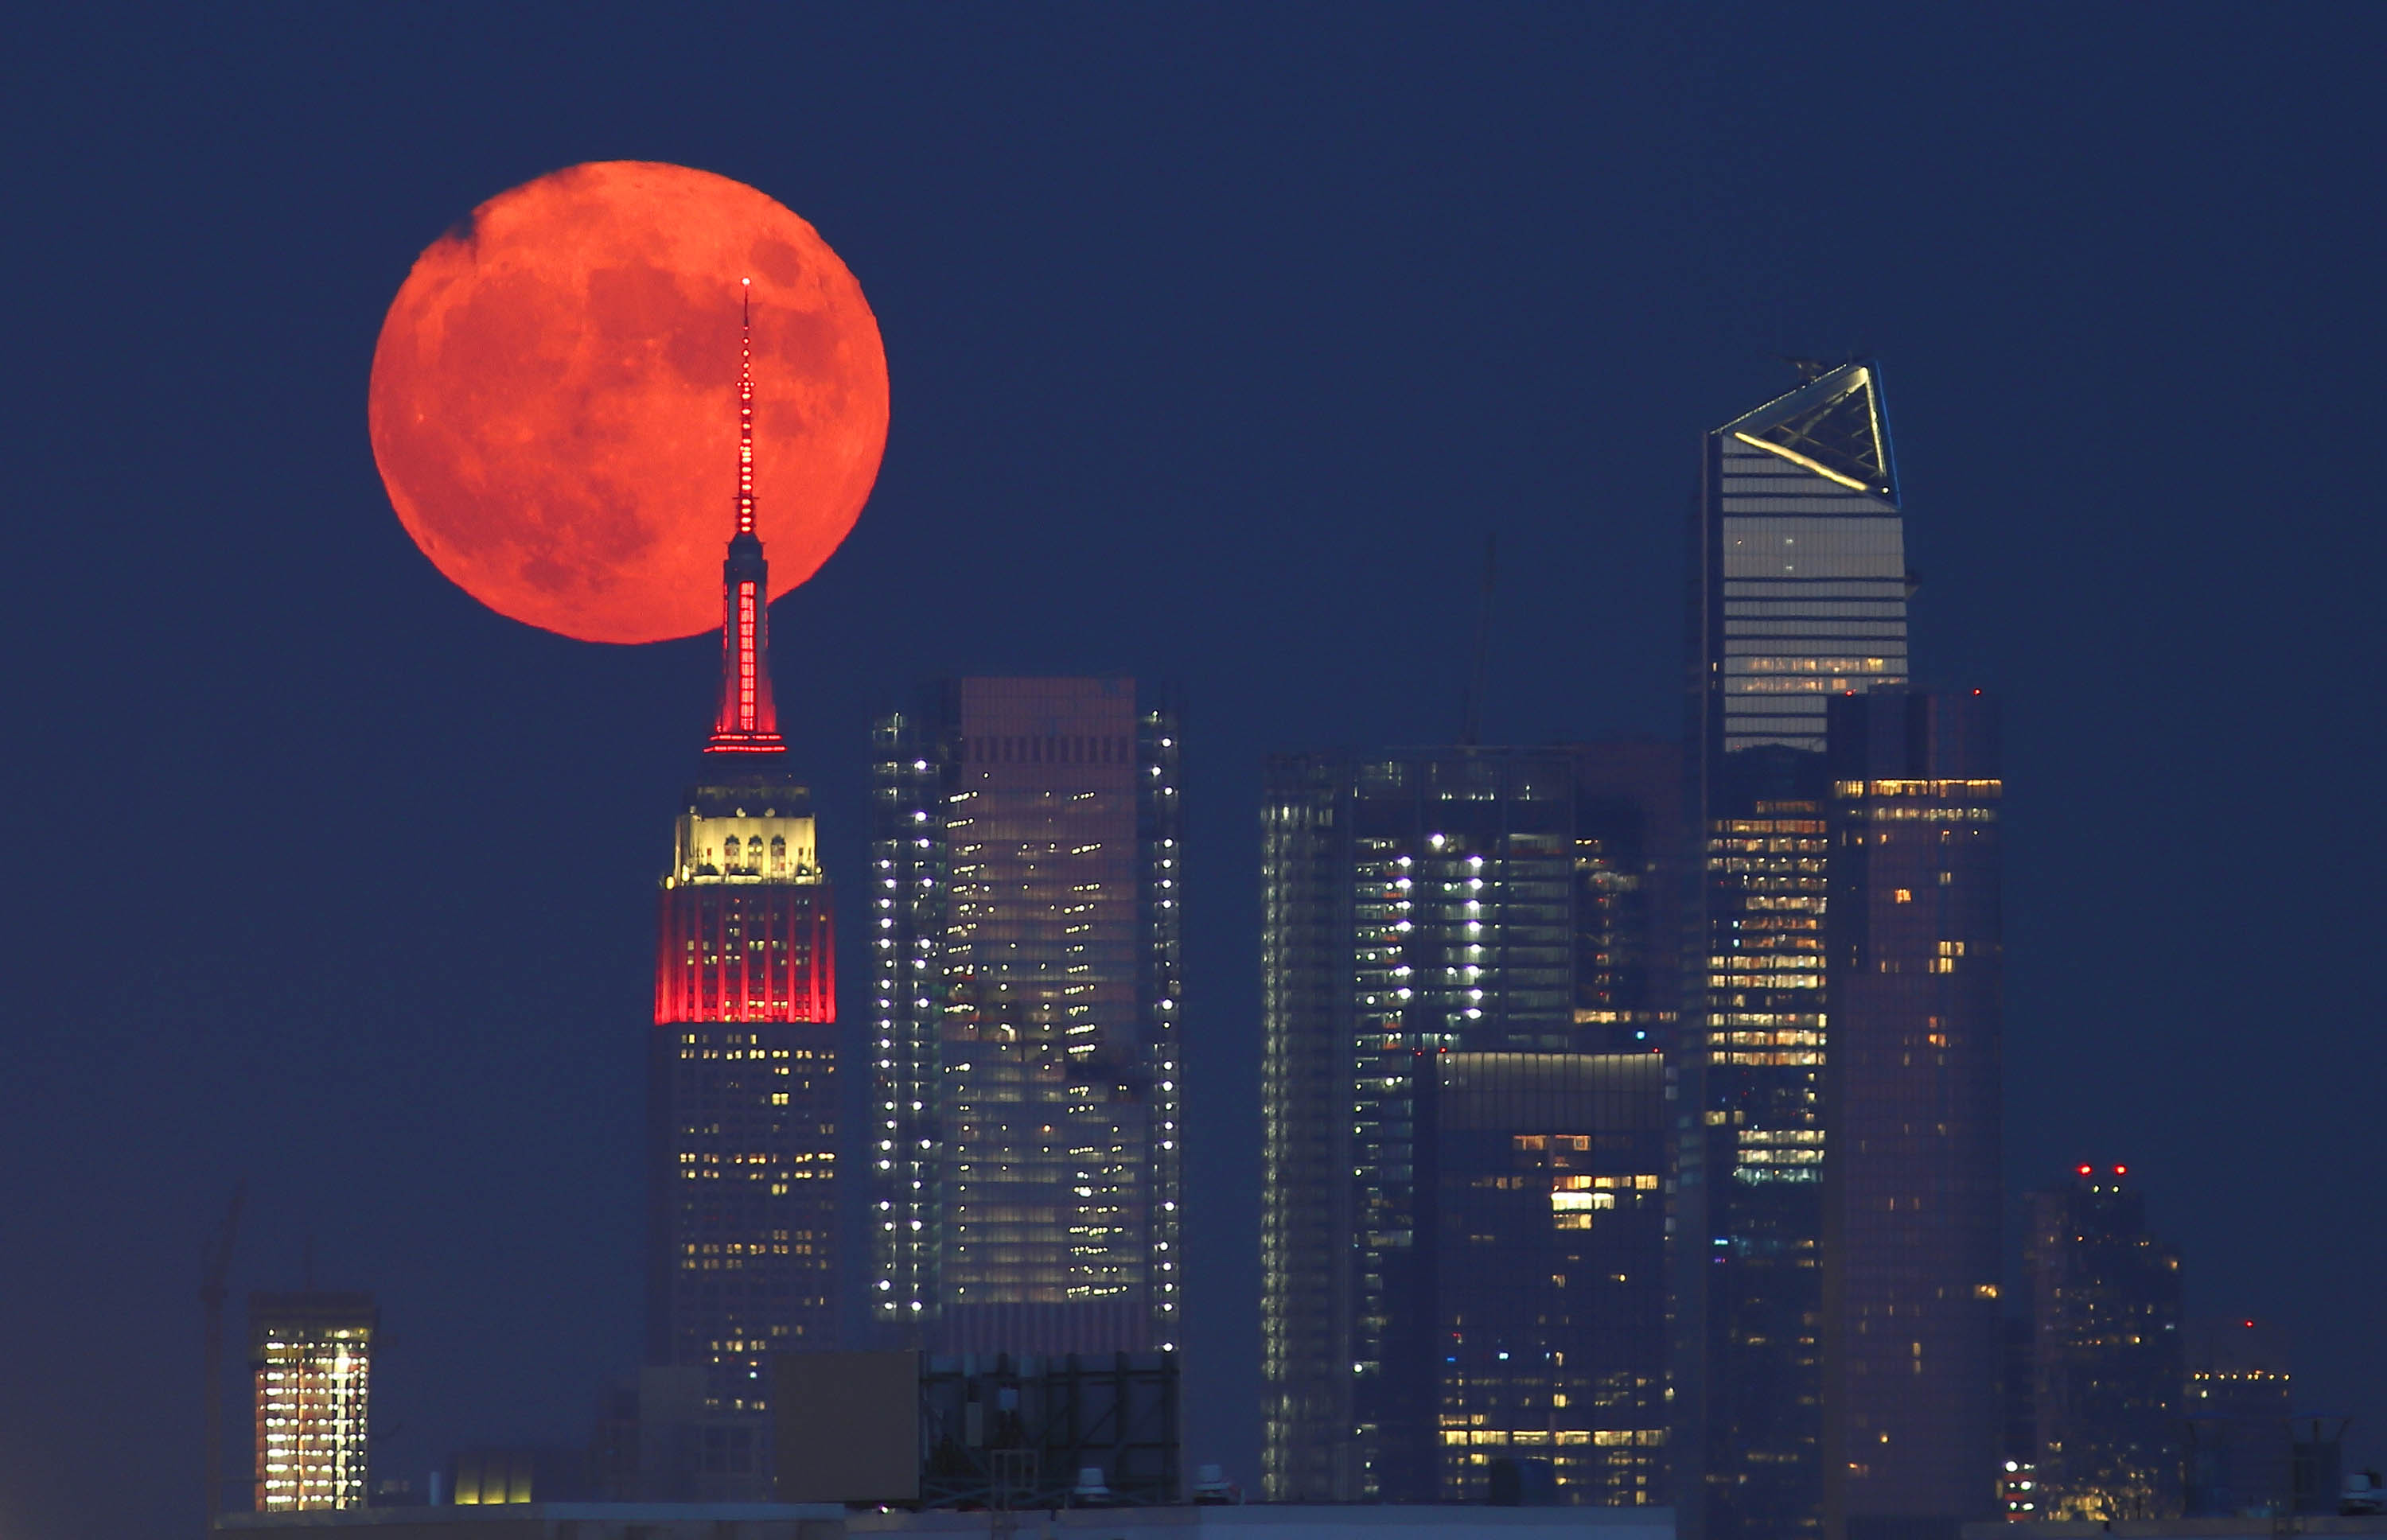 July's Buck Moon is almost here. Find out when and where to catch a glimpse.